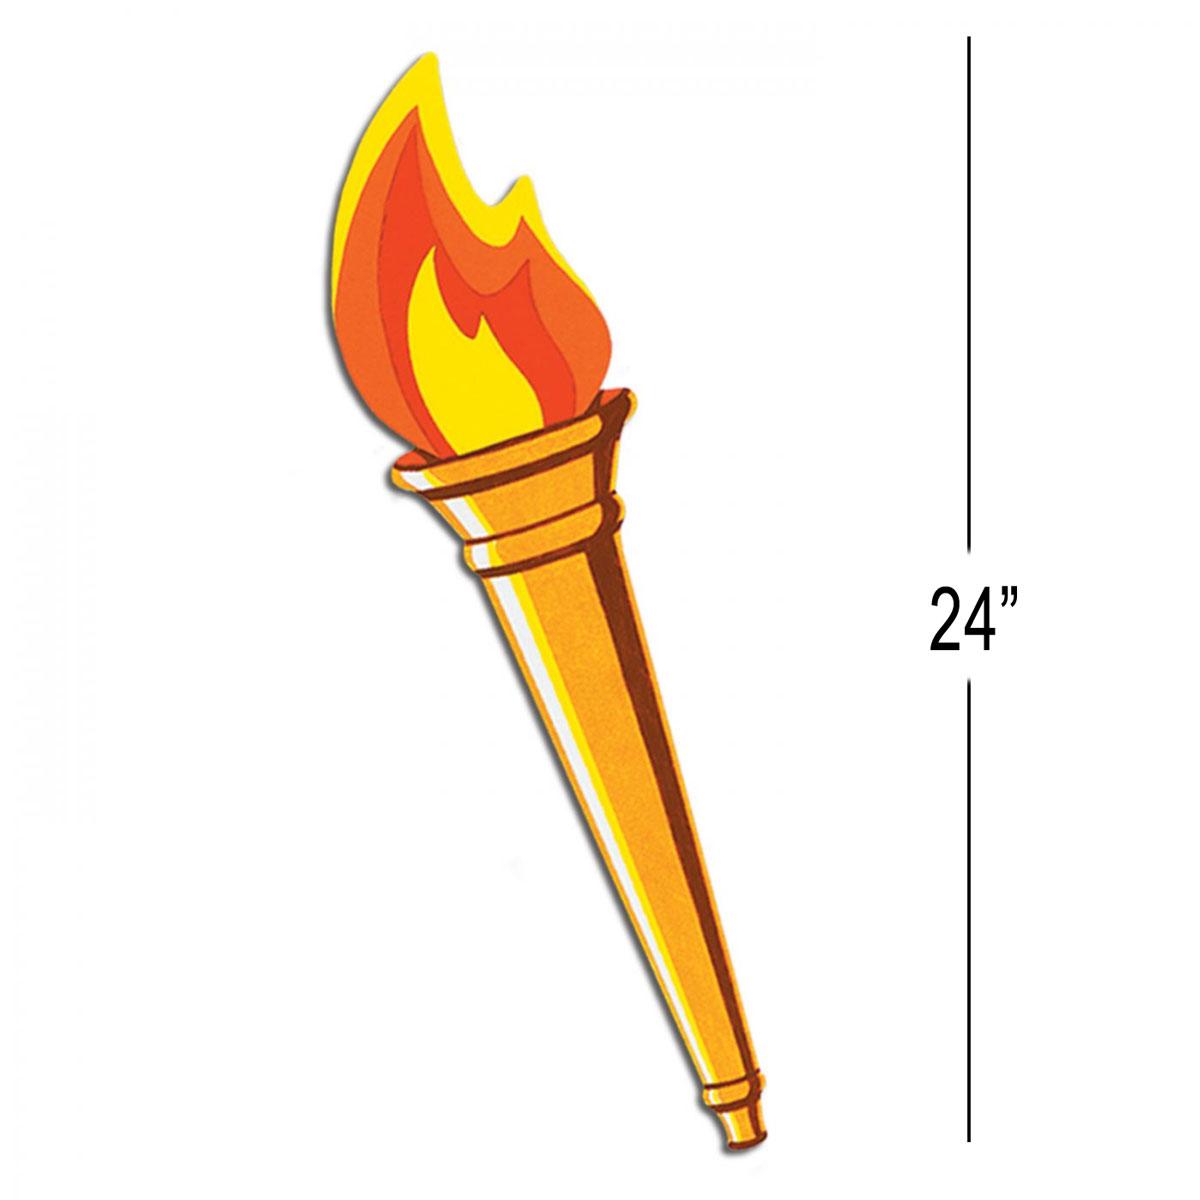 Olympic Torch Cutout 24" in height printed bith side by Beistle 55666 available here at Karnival Costumes online party shop